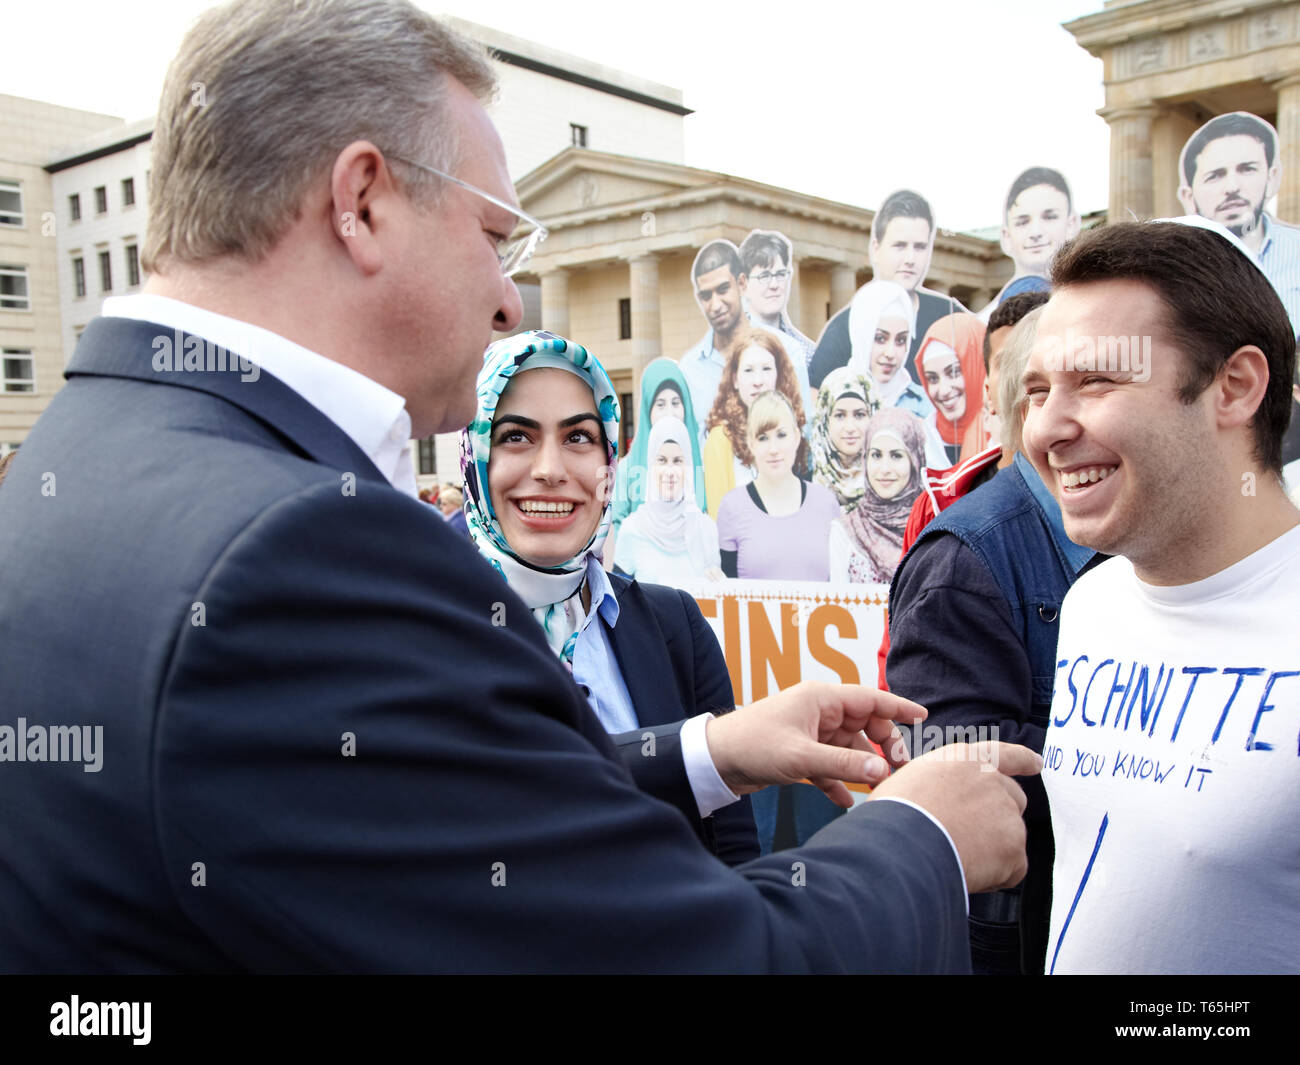 Campaign against intolerance of culture in Berlin Stock Photo